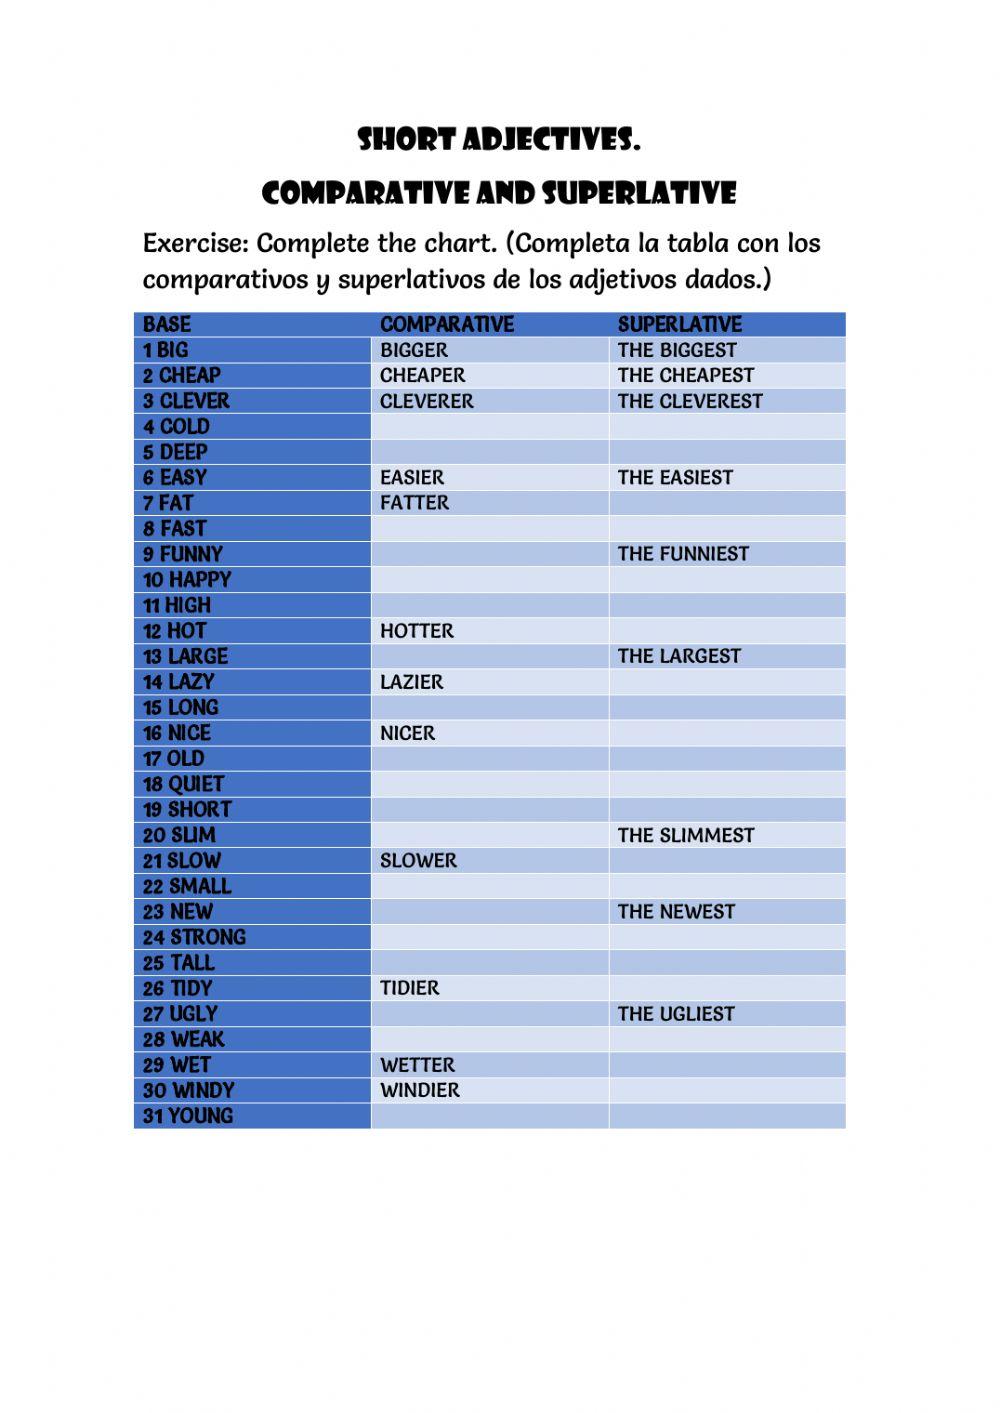 Comparatives and superlatives - short adjectives